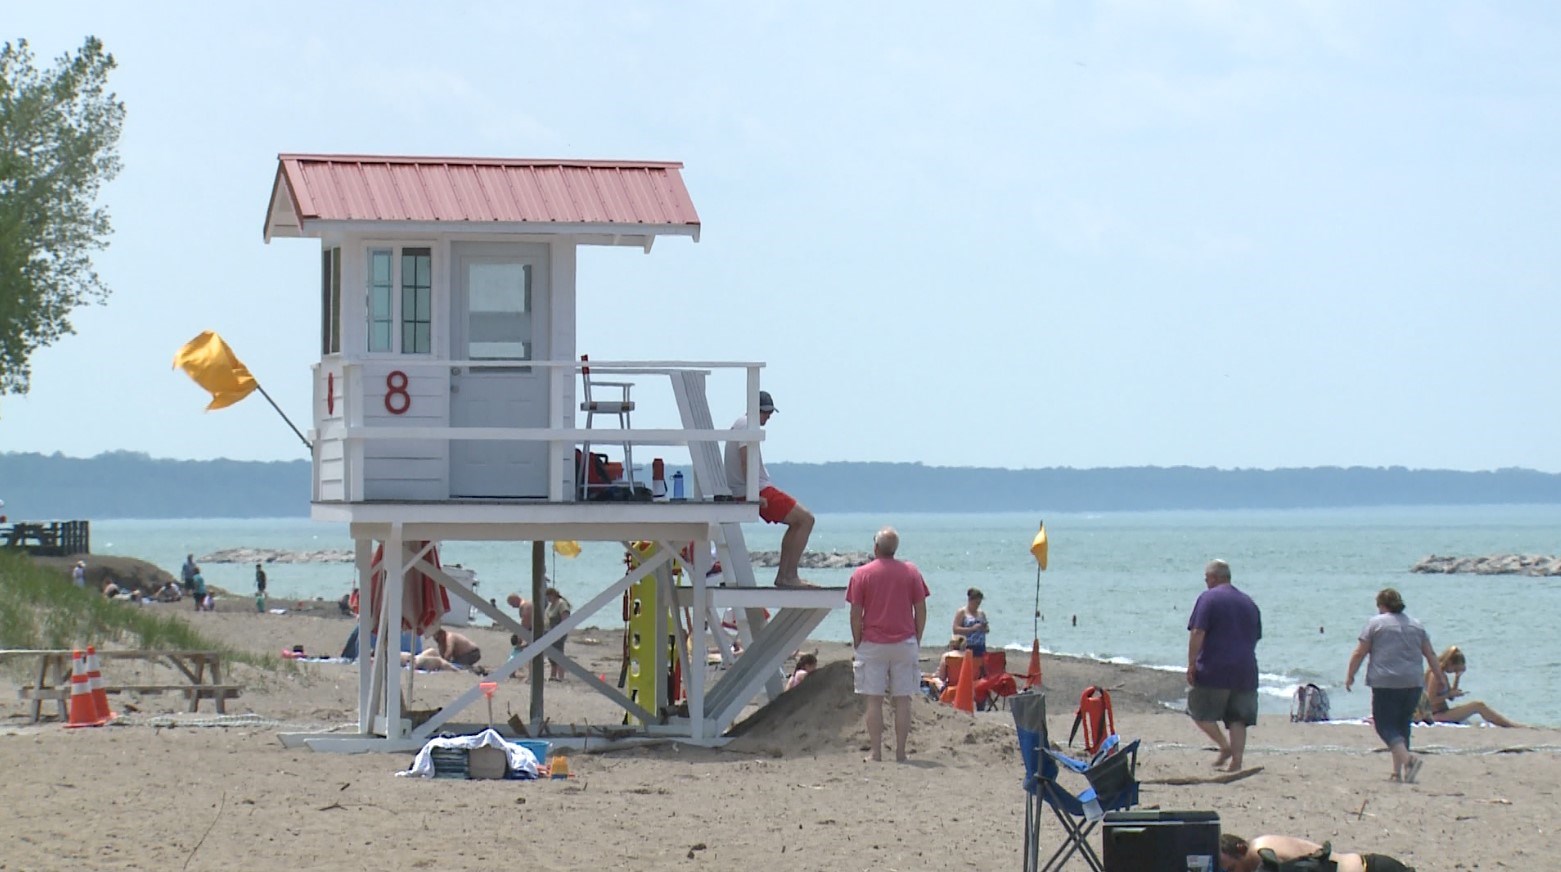 Restricted Swimming Lifted for Presque Isle Beaches 6 and 8